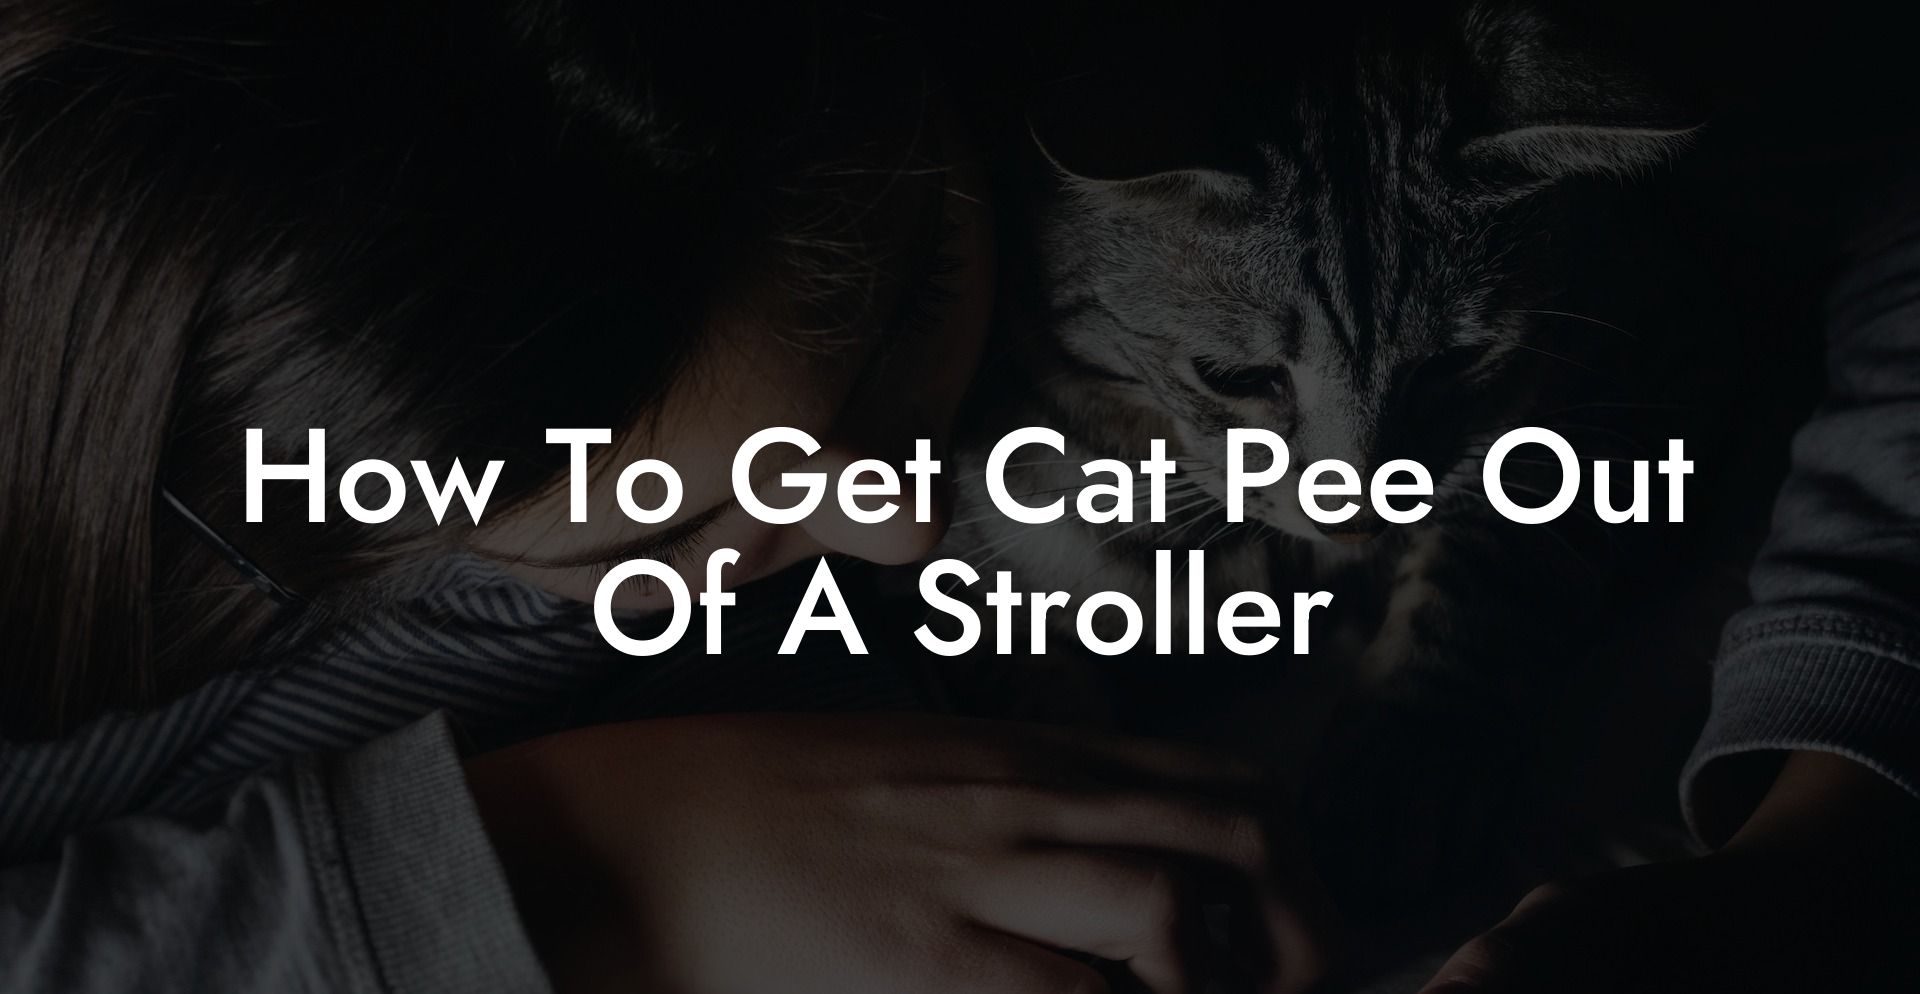 How To Get Cat Pee Out Of A Stroller